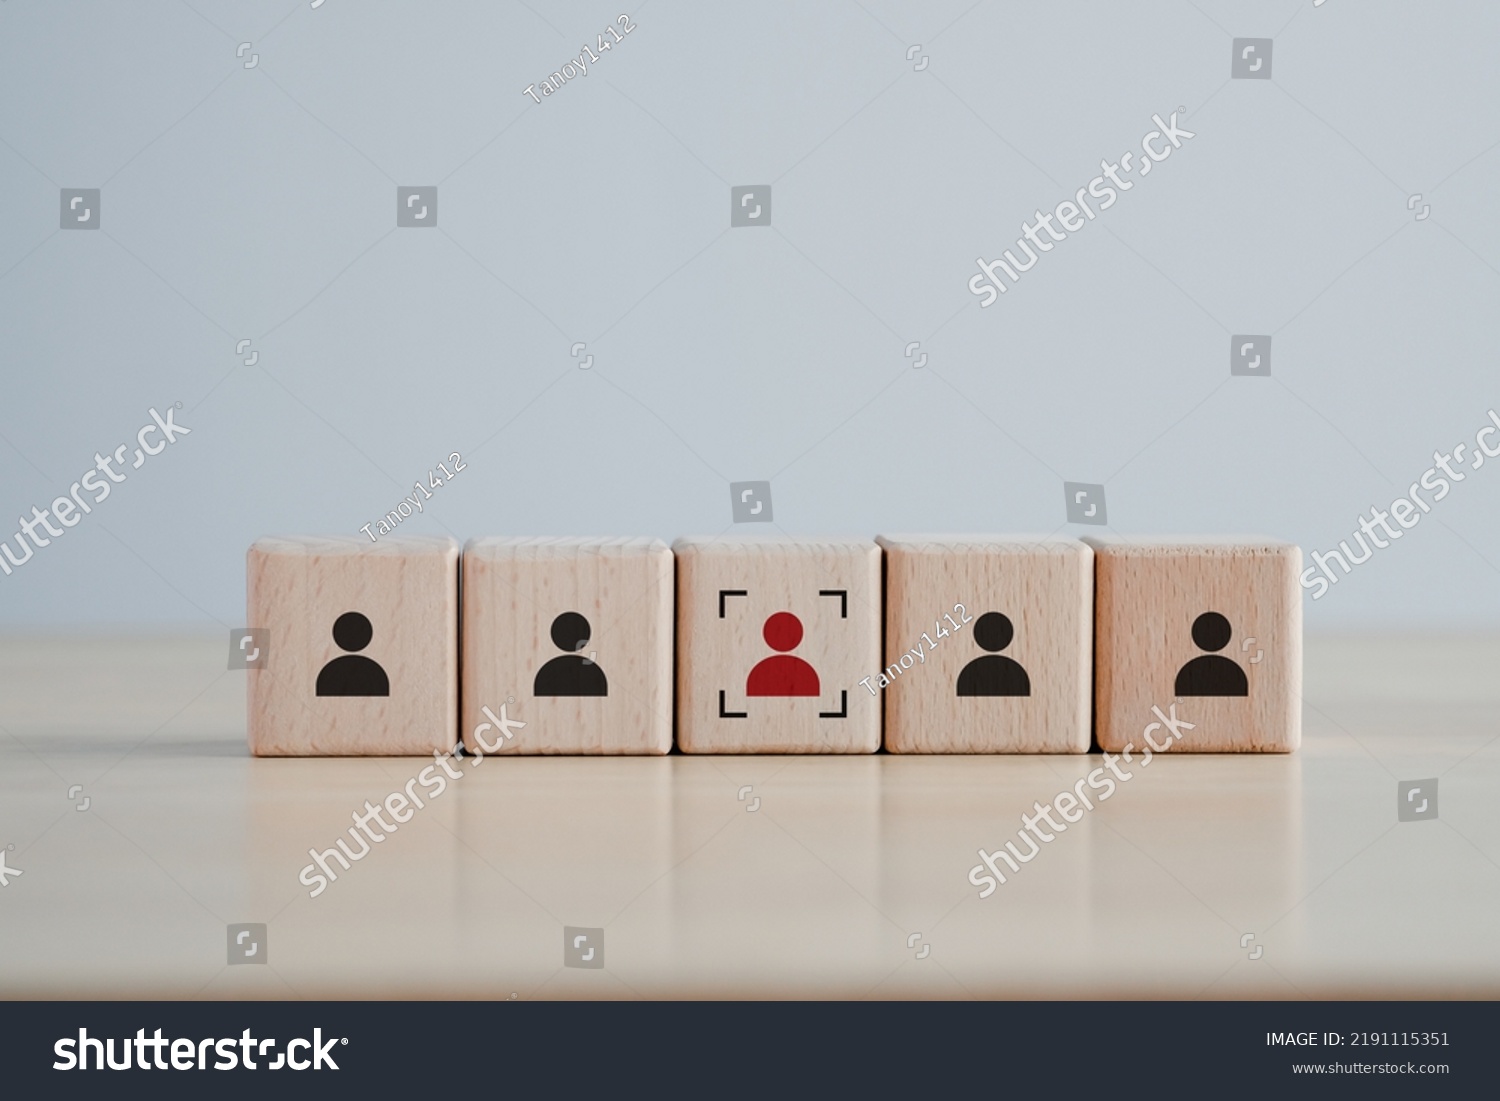 Business hiring and recruitment selection. Career opportunity. Human Resource Management. Focus red human icon on wooden block. Choice of employee leader from the crowd. #2191115351